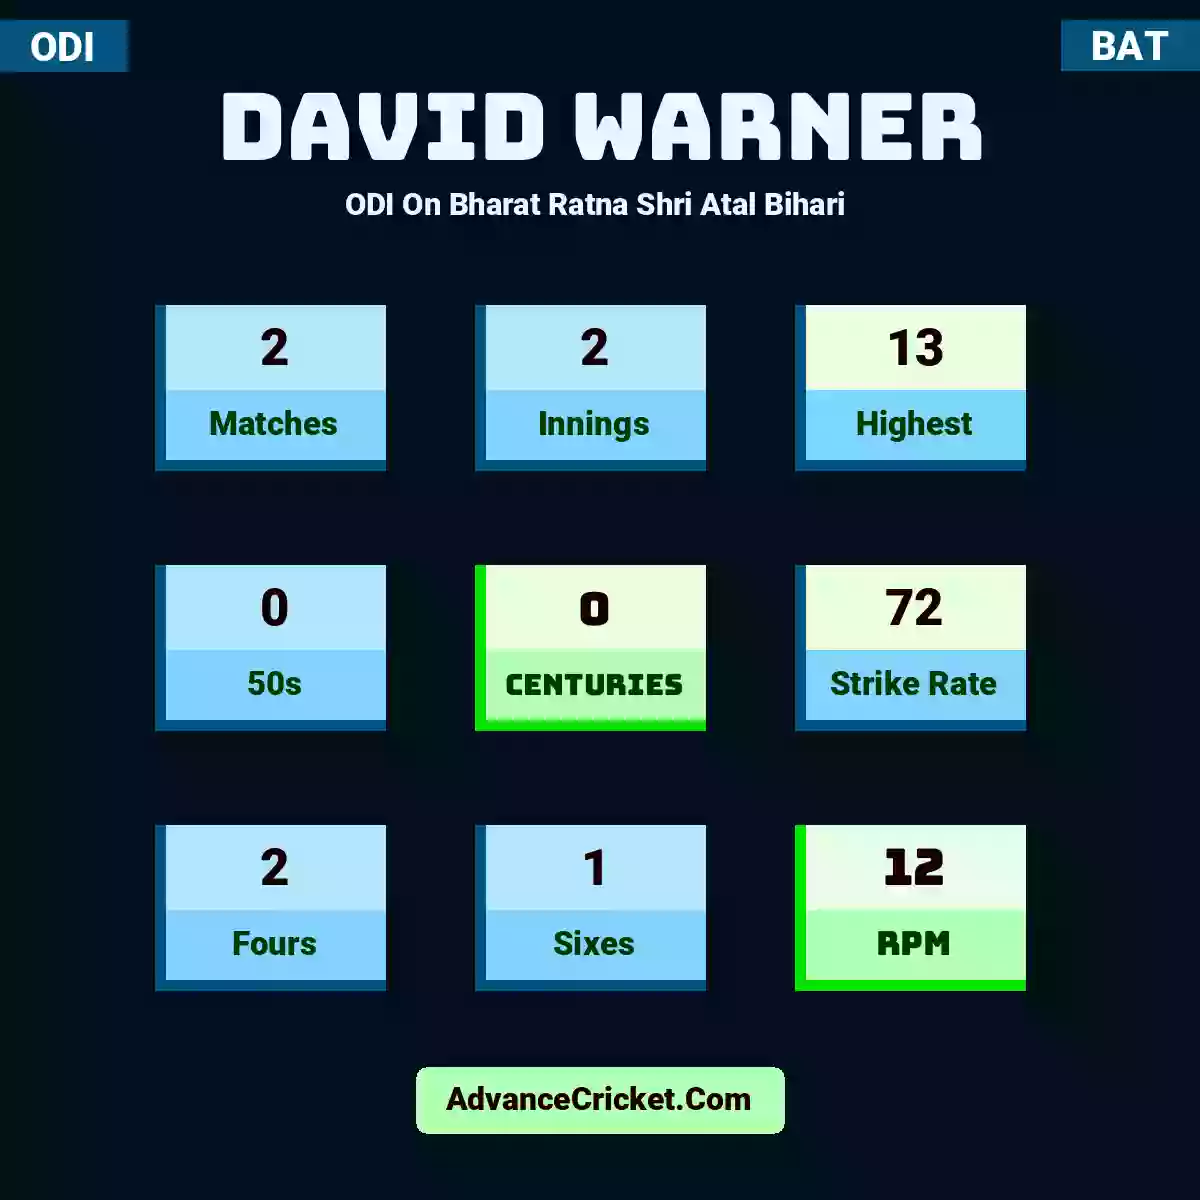 David Warner ODI  On Bharat Ratna Shri Atal Bihari , David Warner played 2 matches, scored 13 runs as highest, 0 half-centuries, and 0 centuries, with a strike rate of 72. D.Warner hit 2 fours and 1 sixes, with an RPM of 12.